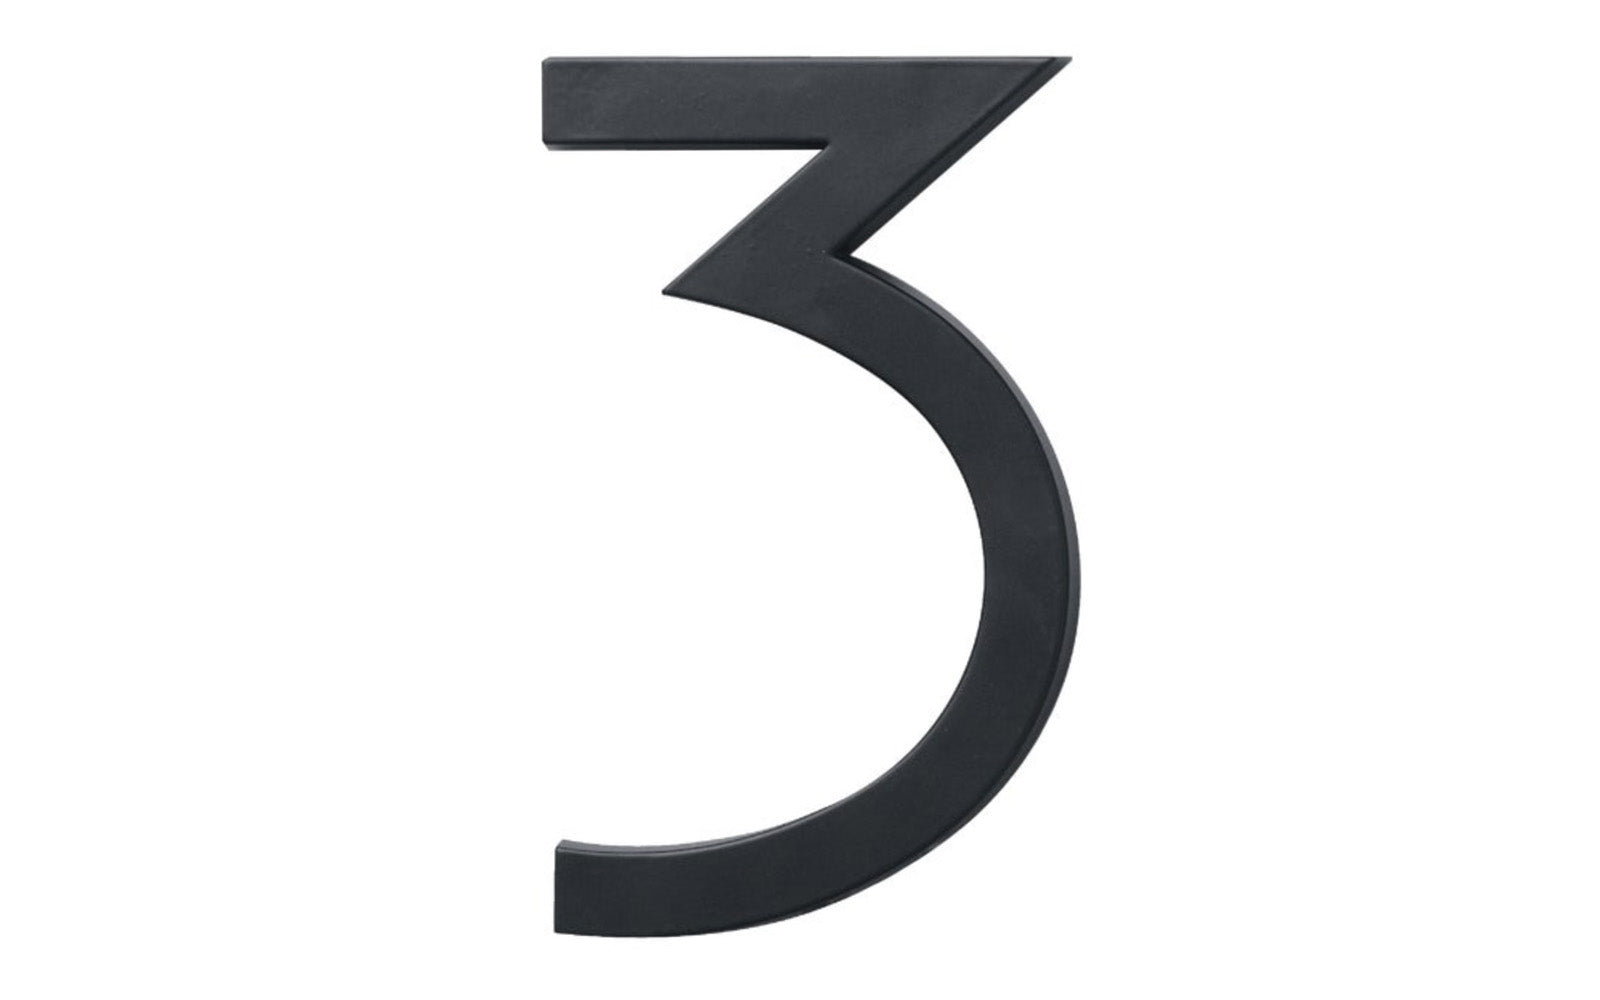 Number Three House Number in a classy architectural style design. Satin black finish. 6" size house number with 1/2" material thickness. Can be installed flush mount or floating mount (elevated from wall for a shadow effect). #3 House Number. Hy-Ko Model No. FM-6/3. 029069310738